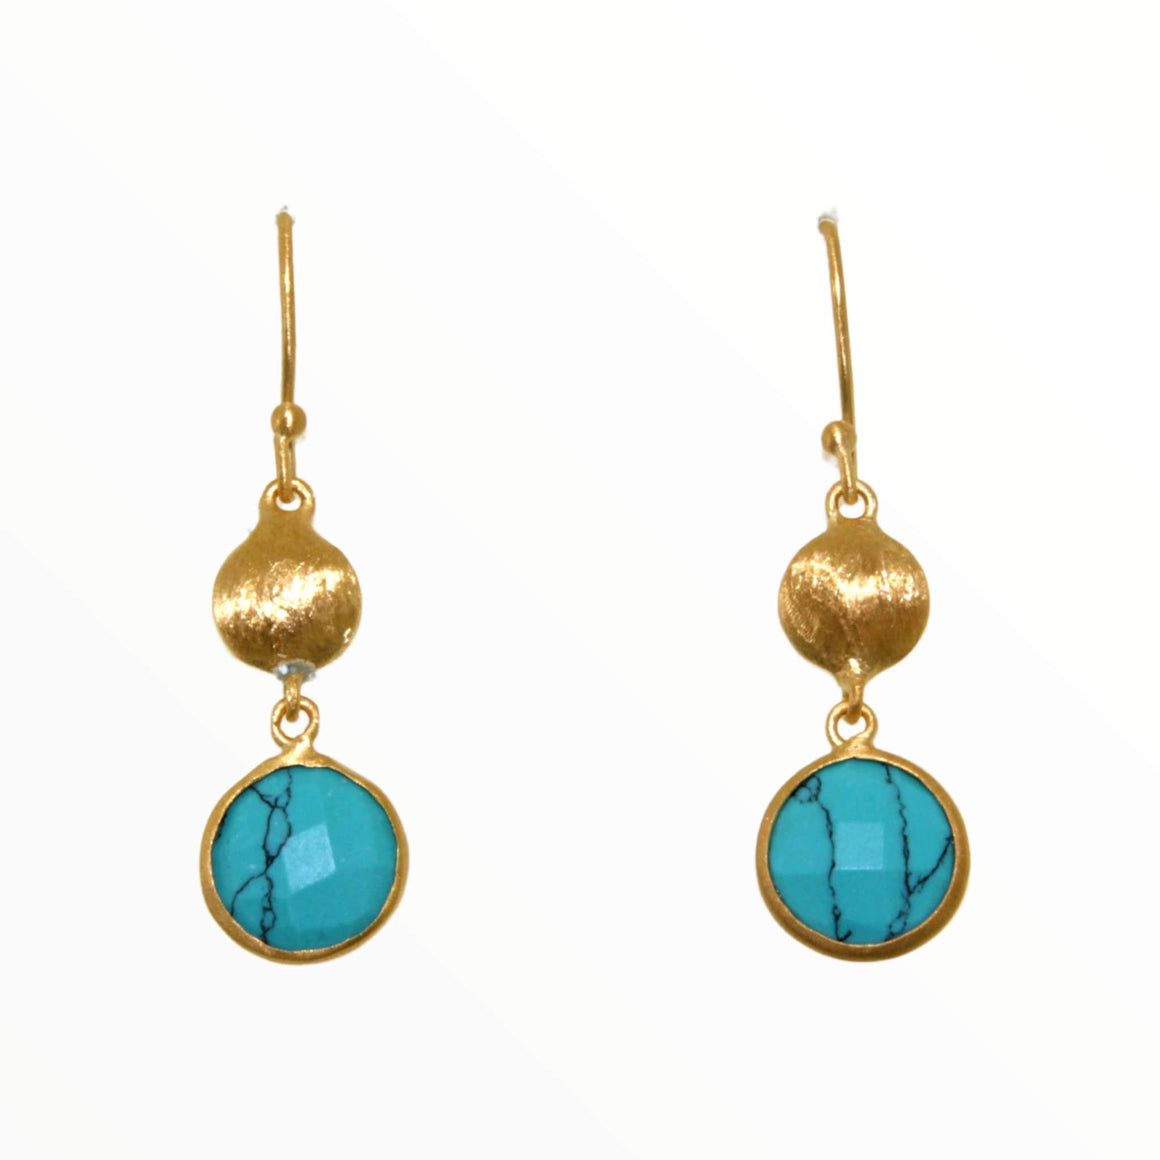 Peacock Pebble Gold Earrings in Turquoise